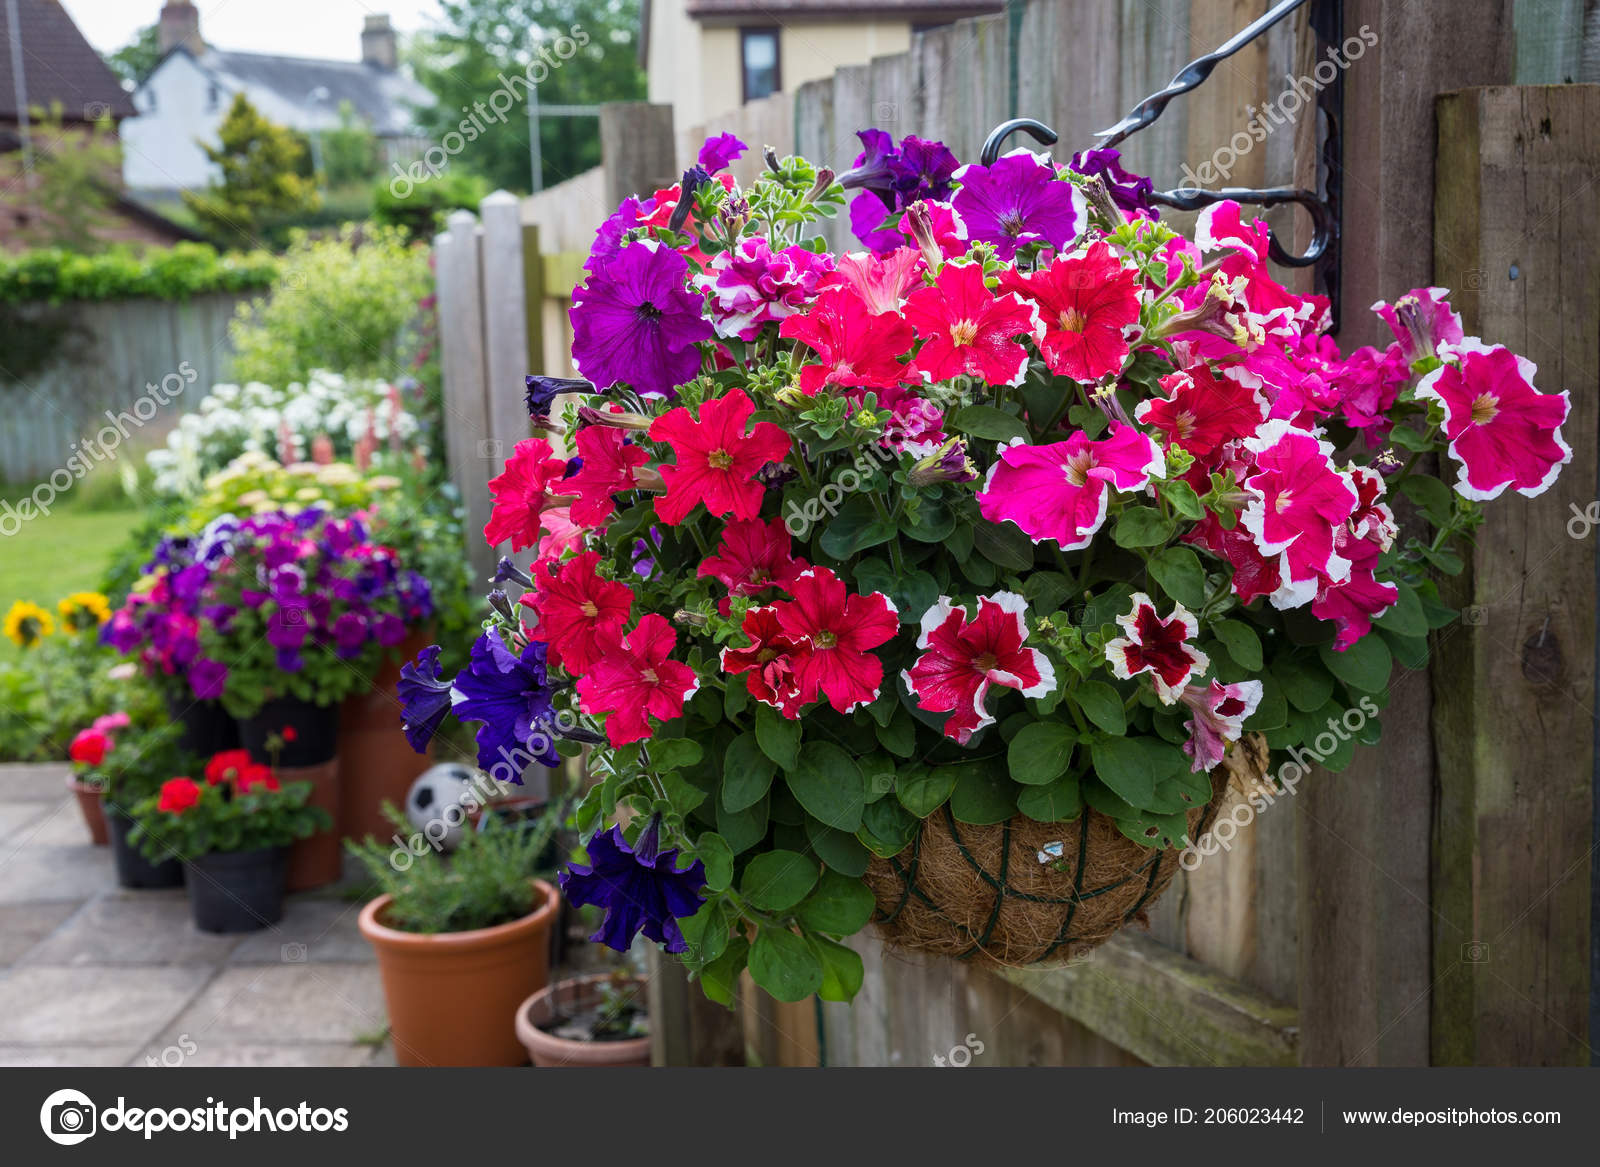 Pictures Hanging Basket Flowers Hanging Basket Filled Petunia Flowers Garden South Wales Stock Photo C Michael6882 206023442